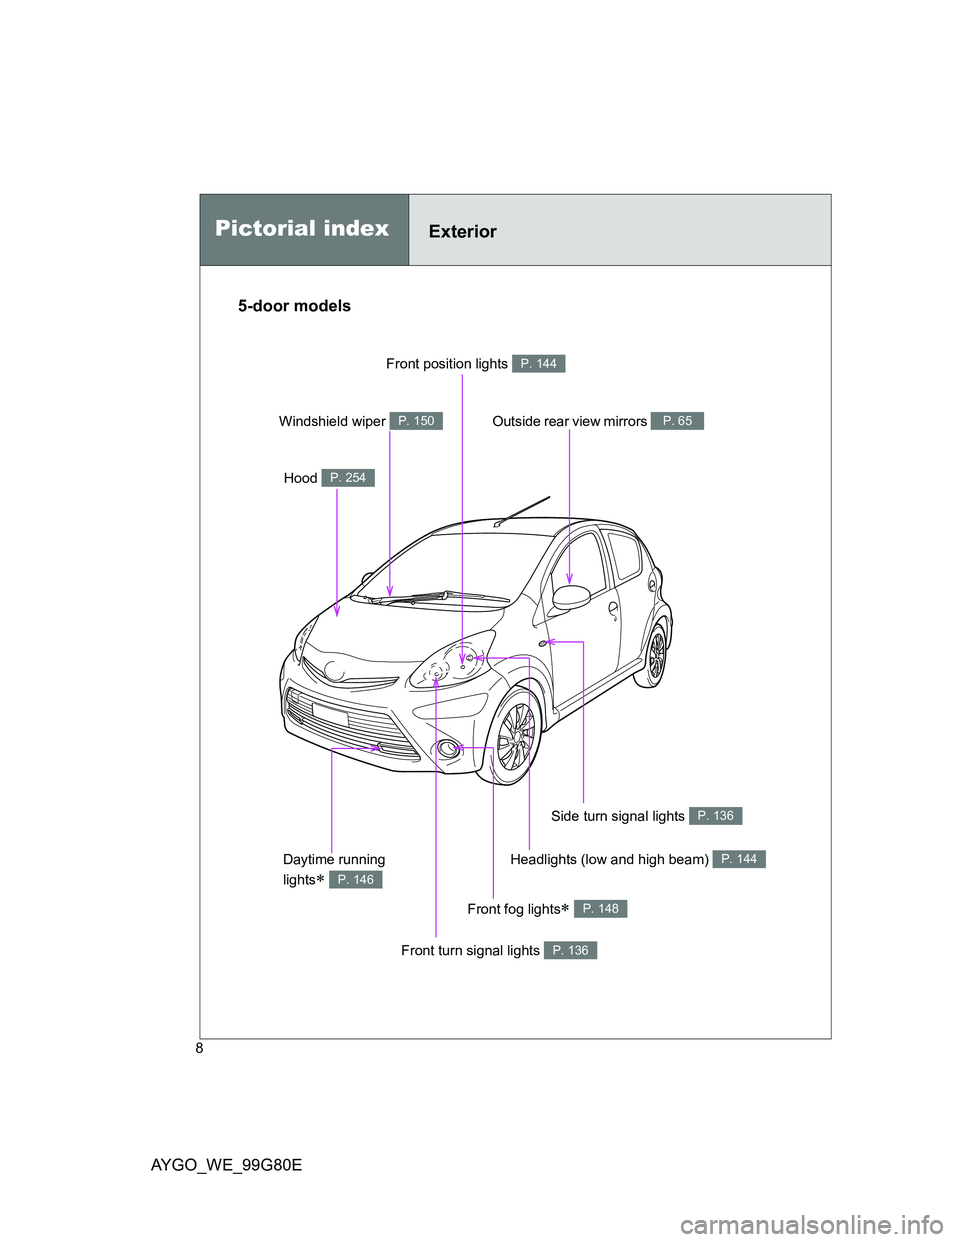 TOYOTA AYGO 2013  Owners Manual (in English) AYGO_WE_99G80E
8
Front fog lights P. 148
Pictorial indexExterior
Front turn signal lights P. 136
Side turn signal lights P. 136
Outside rear view mirrors P. 65
Headlights (low and high beam) P. 144